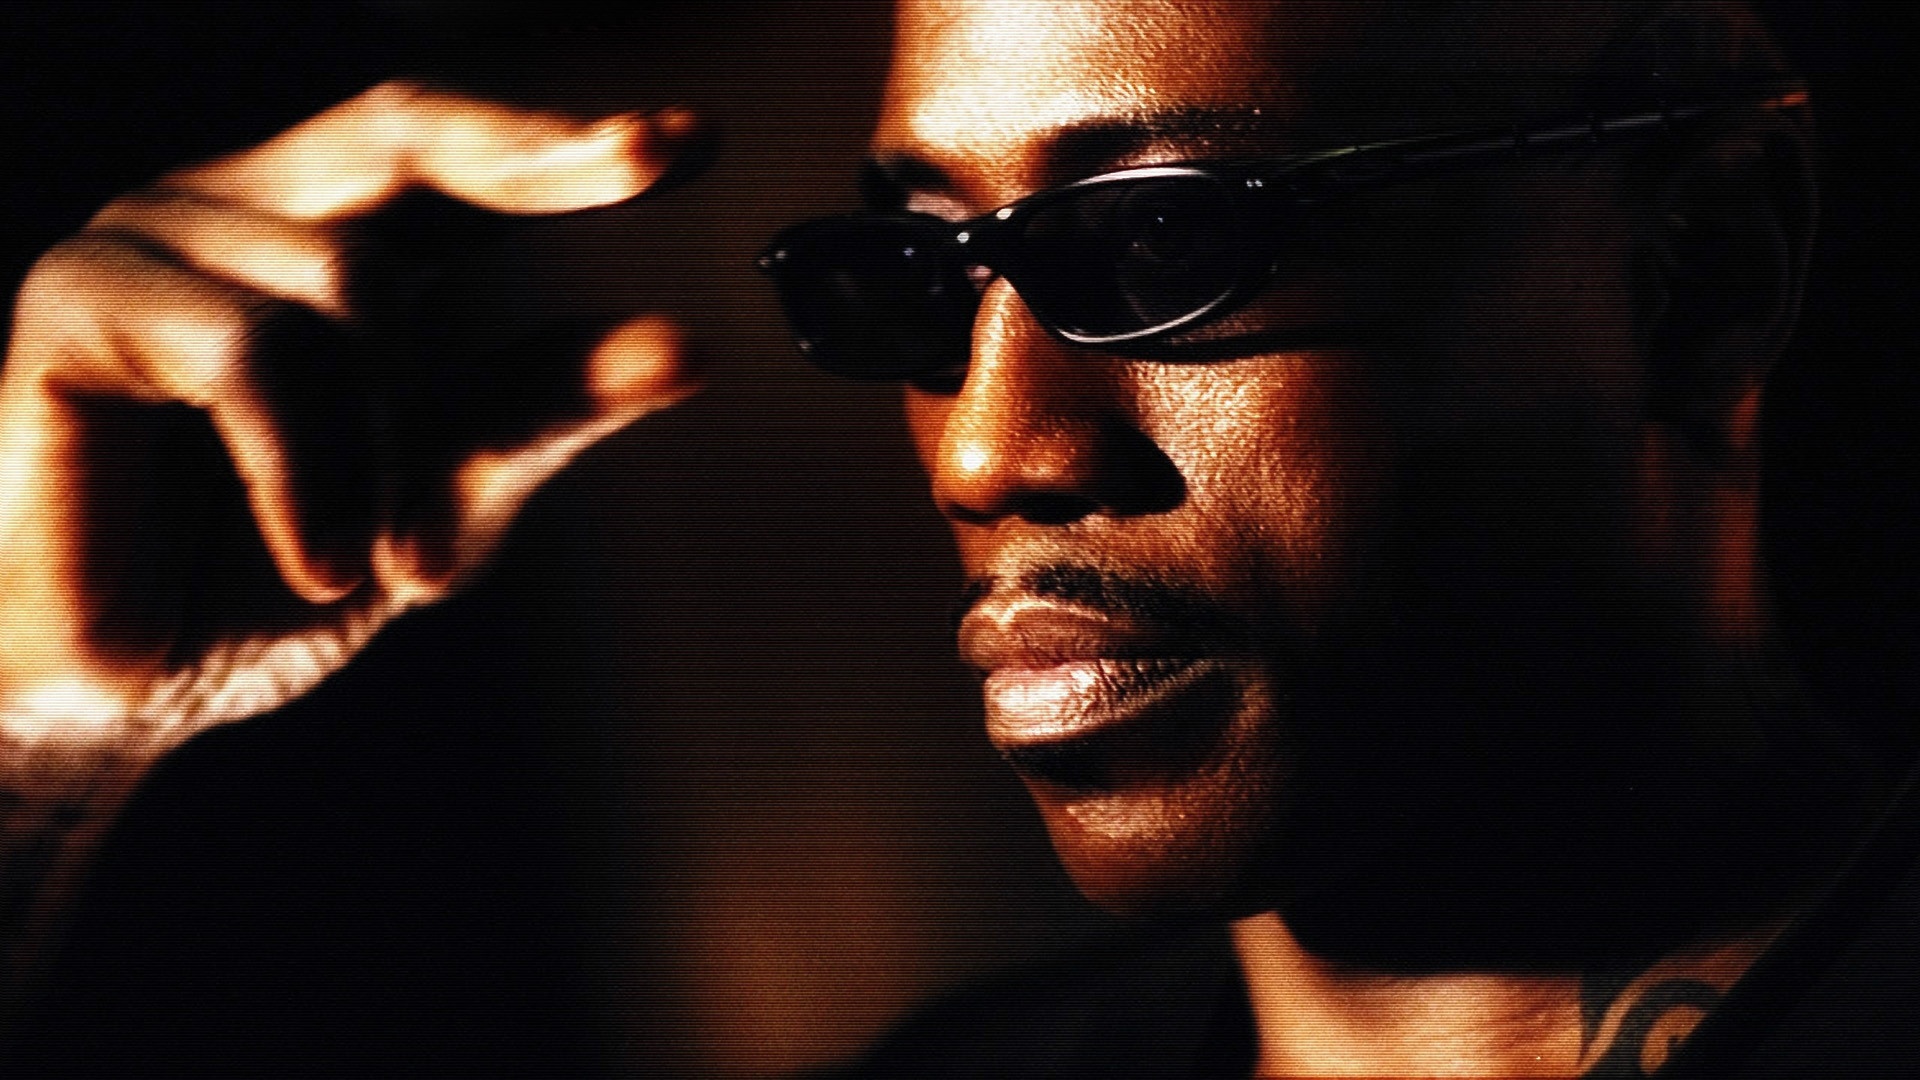 Wesley Snipes, Blade wallpapers, High-definition images, Action movies, 1920x1080 Full HD Desktop